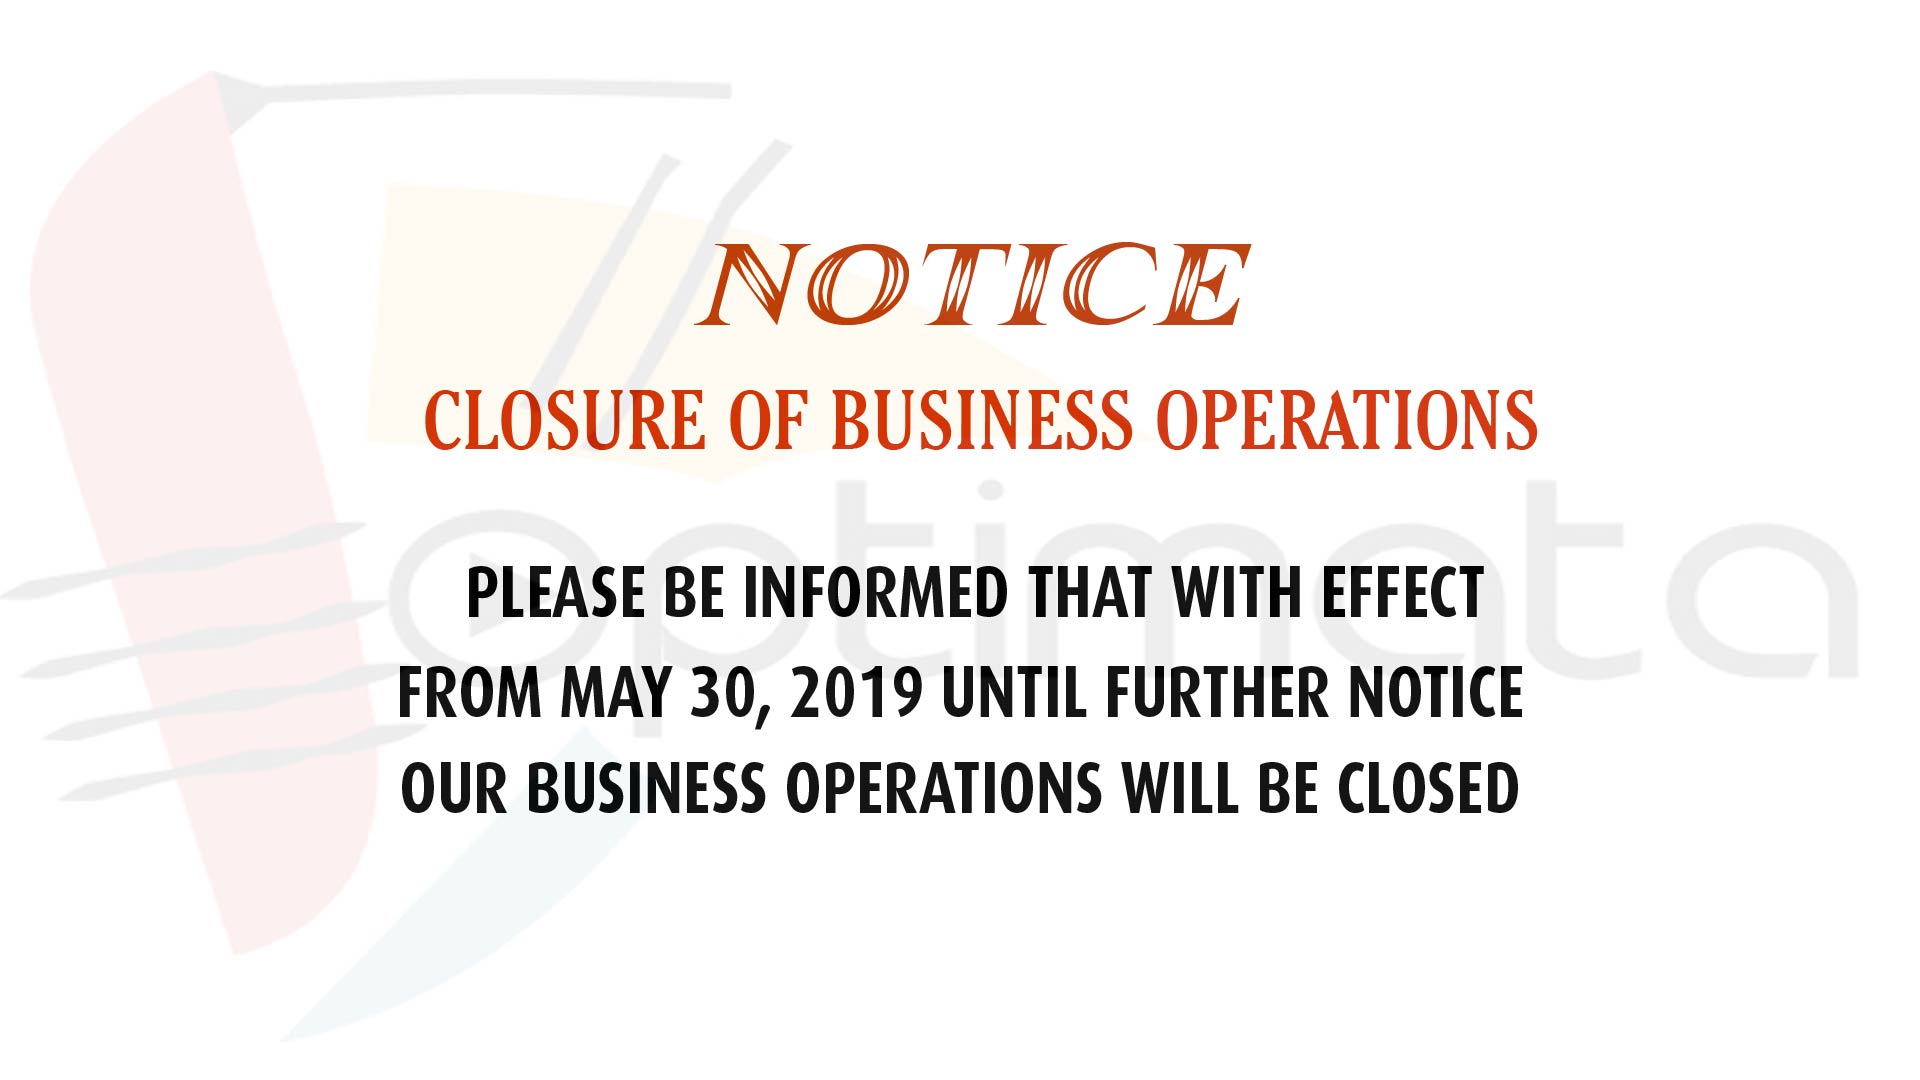 Closure of business operations. Please be informed that with effect from May 30, 2019 until further notice our business operations will be closed